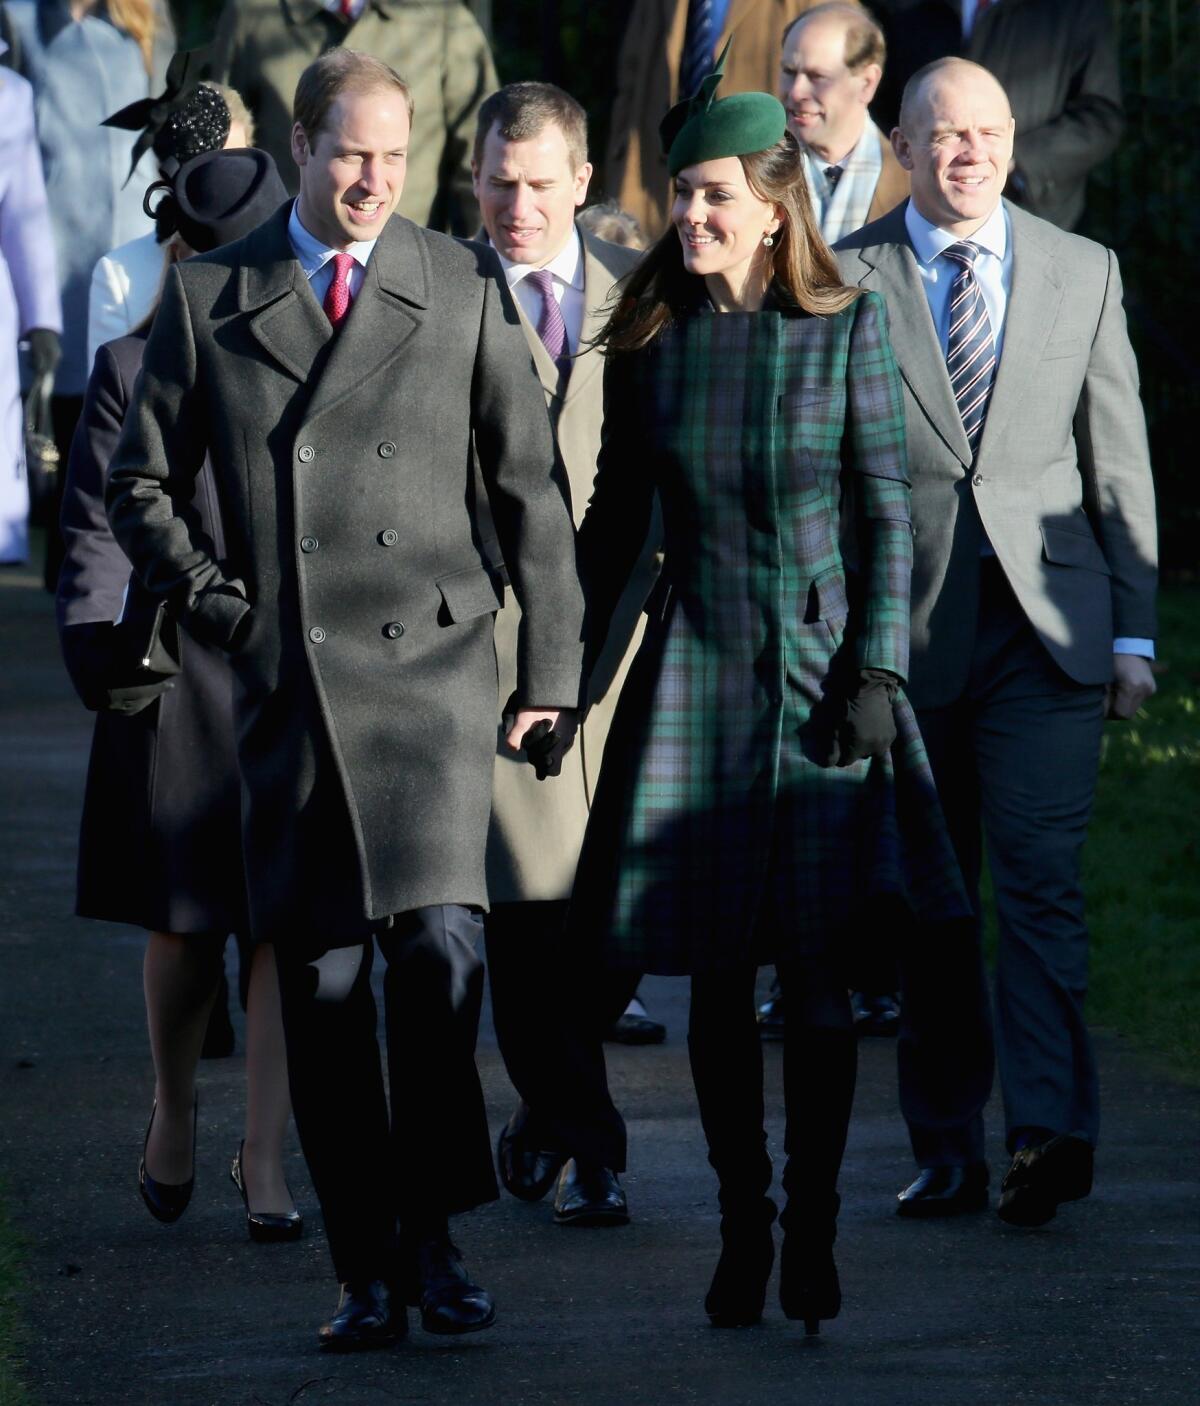 Prince William, duke of Cambridge and Catherine, duchess of Cambridge, arrive for the Christmas Day service at Sandringham on Wednesday in King's Lynn, England.